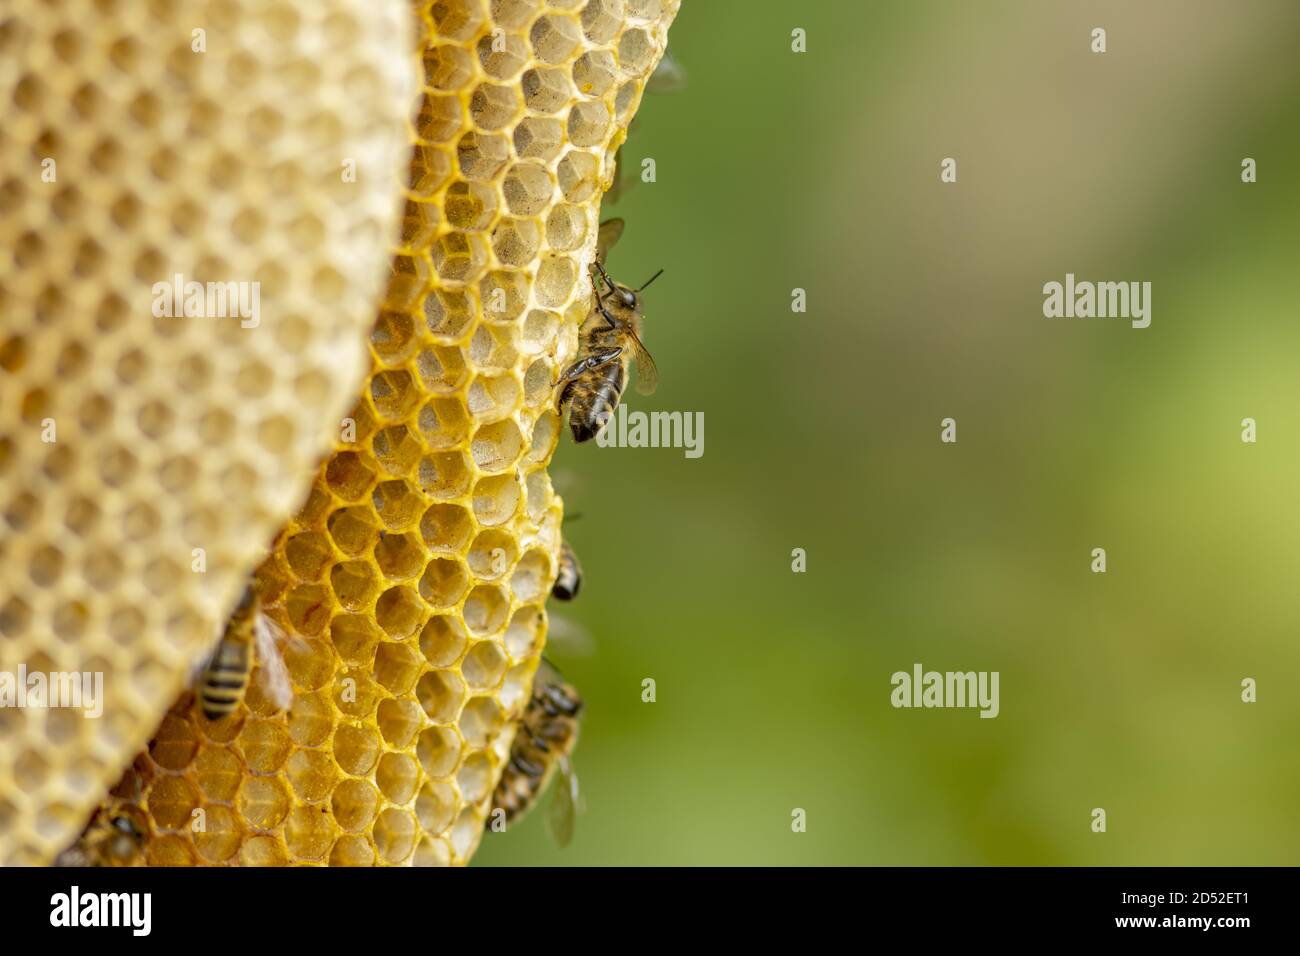 Bee on the edge of honeycomb layer in natural surrounding Stock Photo